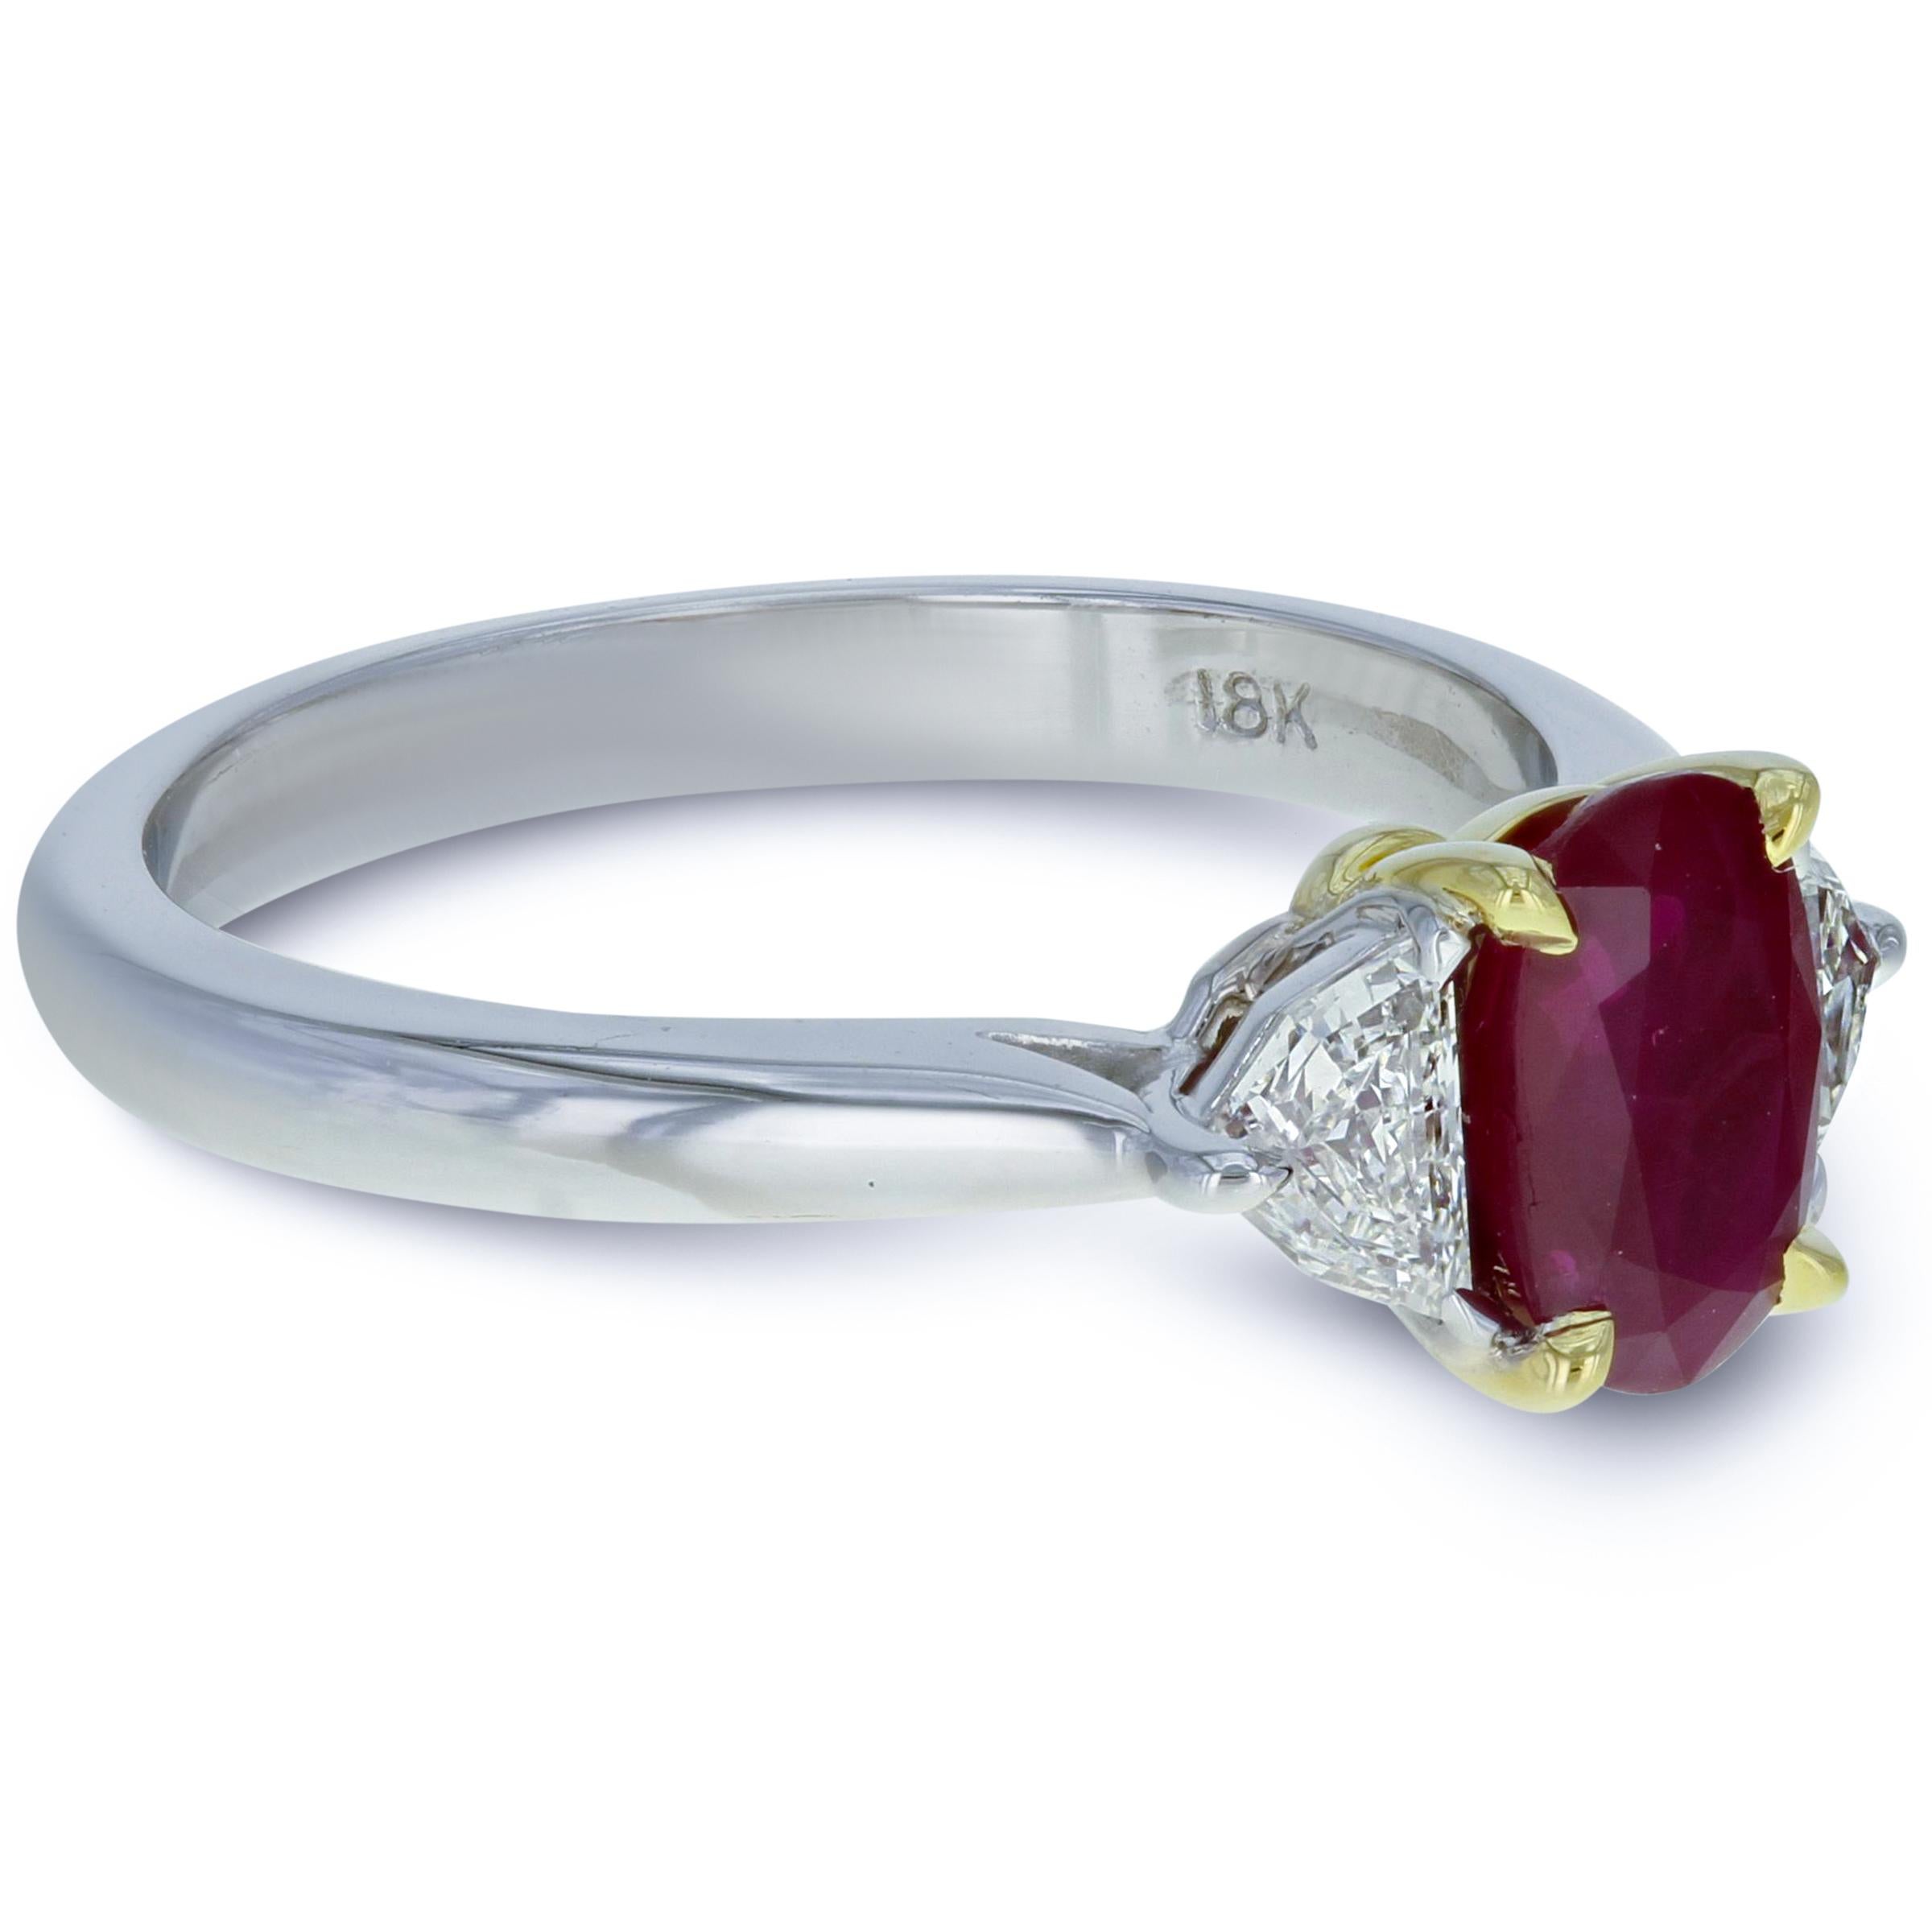 Handmade three stone ruby diamond engagement ring. Crafted in 18K white gold and starring a sweet and luscious natural Burmese ruby, weighing 1.36 carats. The crystalline gemstone boasts incredible color and hue and is GIA certified. It is flanked